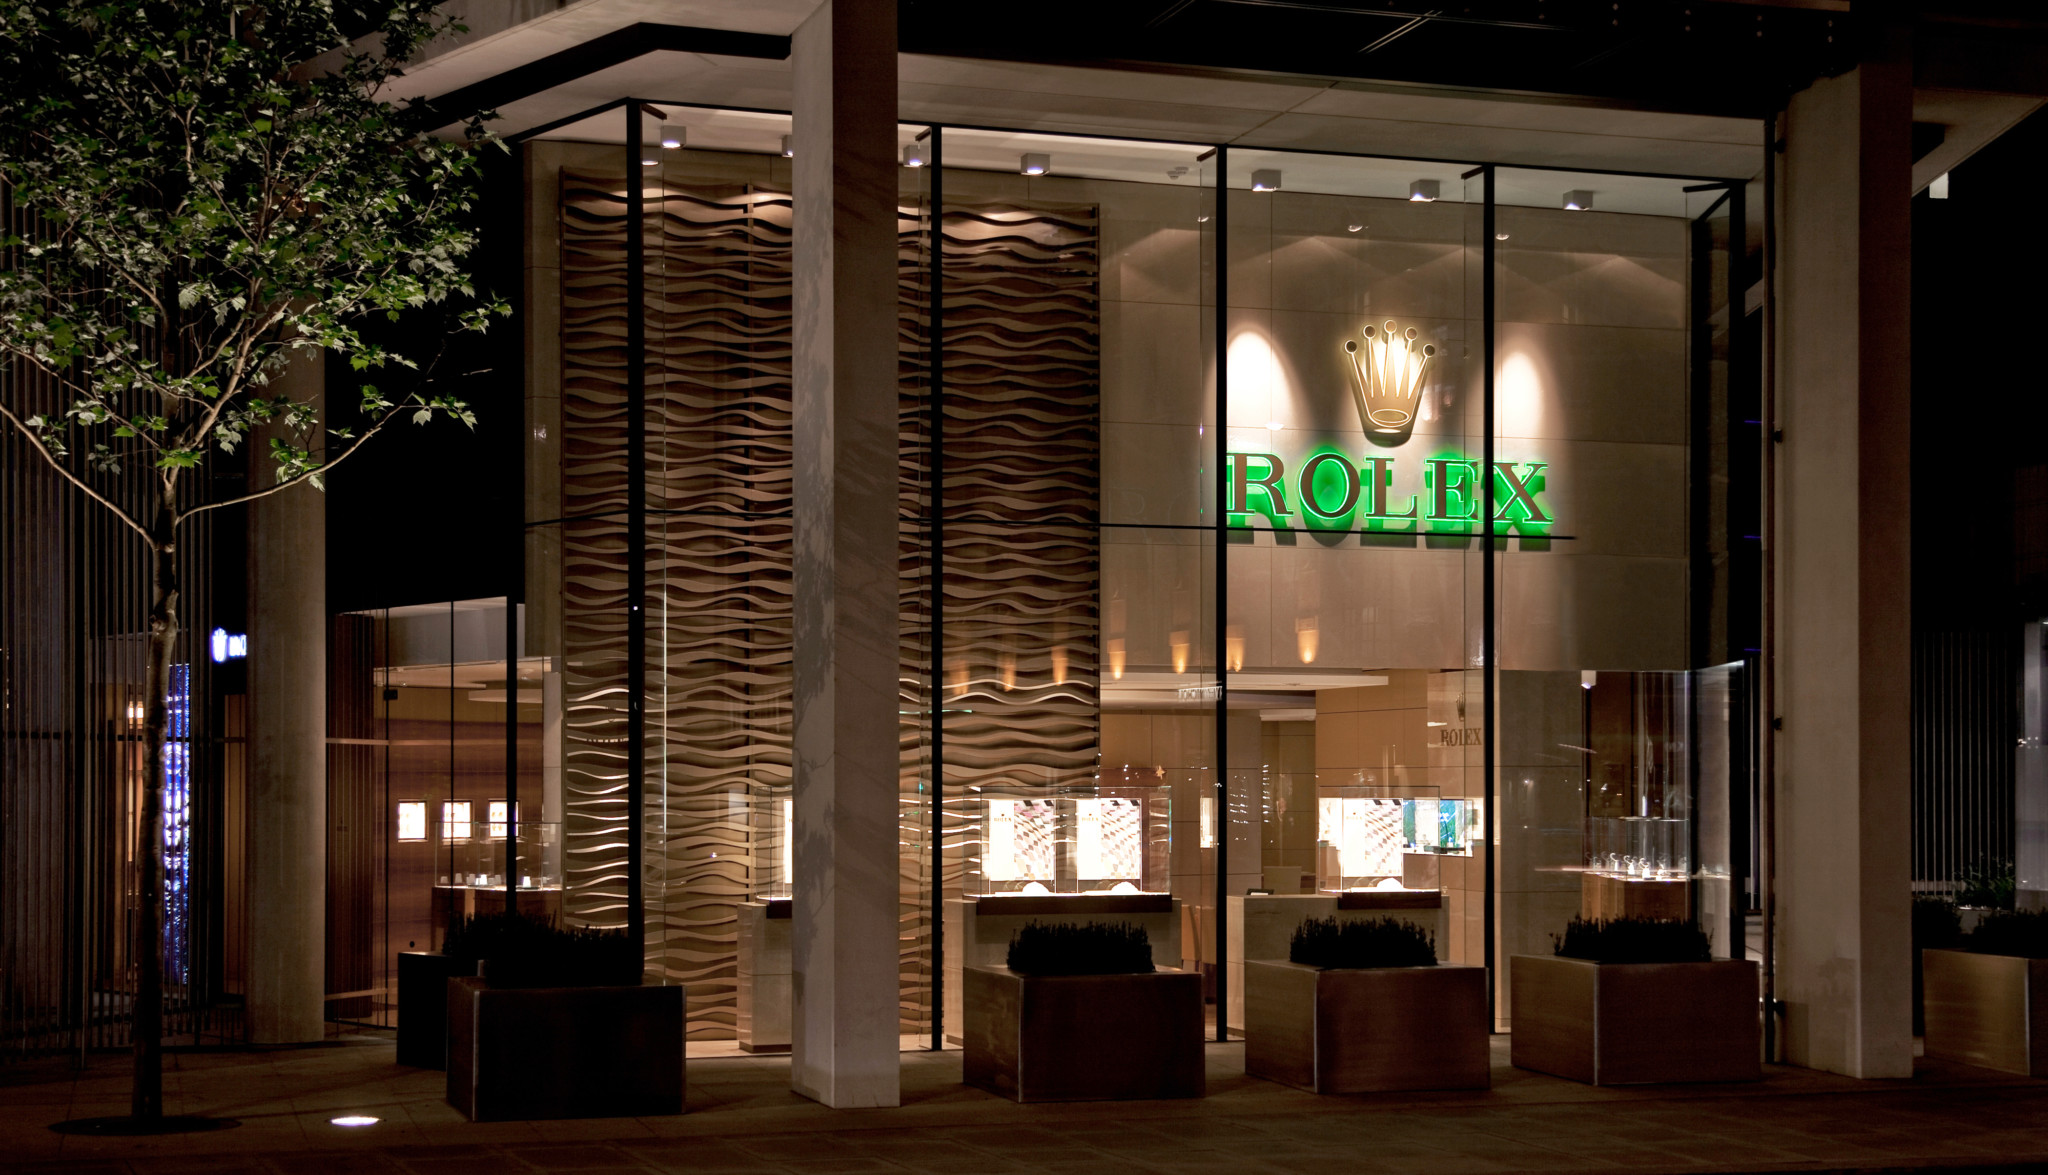 The rolex boutique at one hyde park in london's knightsbridge, is the biggest rolex showroom in the uk.